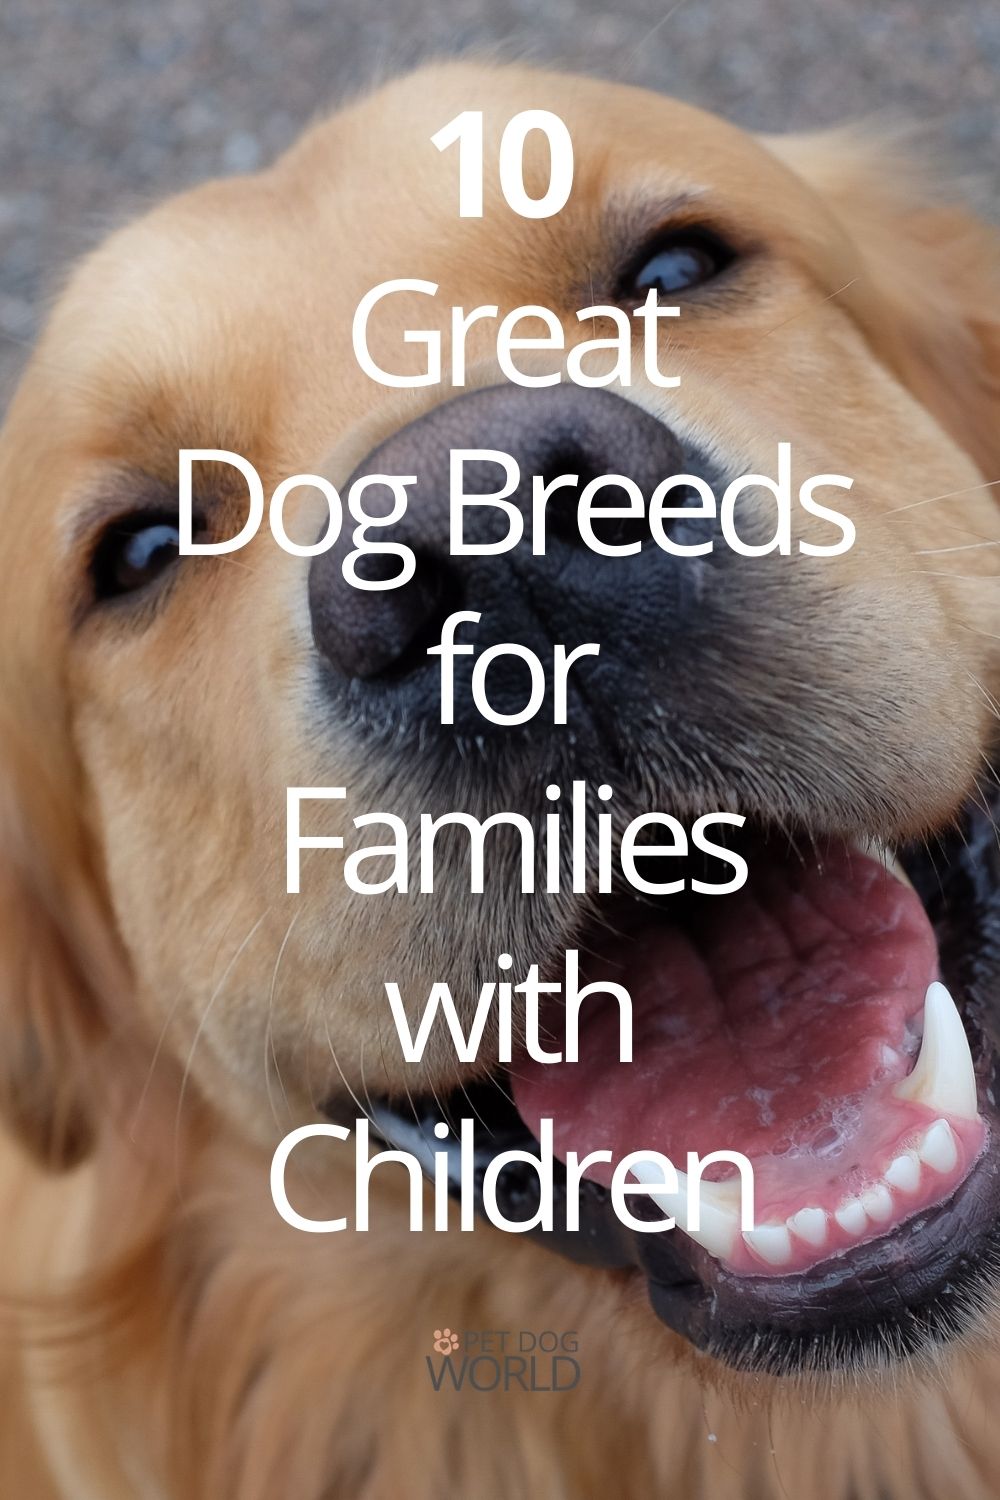 10 Great Dog Breeds for Families with Children